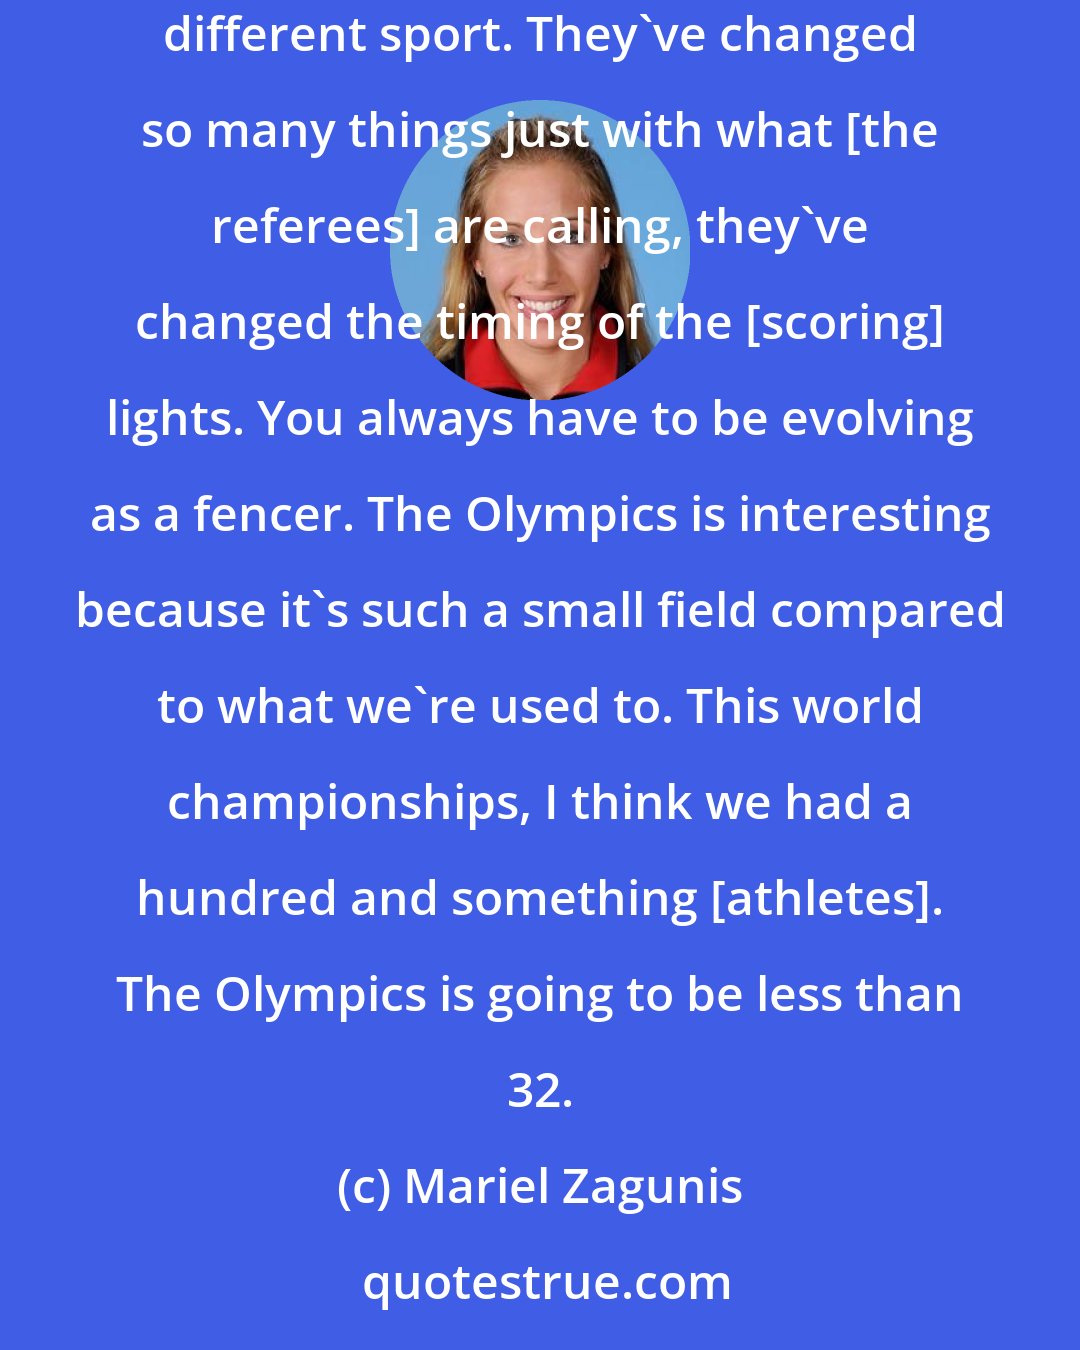 Mariel Zagunis: The sport has changed so much since 2004, it's incredible. If you look even at me, the way I'm fencing now compared to 2004, it's a completely different sport. They've changed so many things just with what [the referees] are calling, they've changed the timing of the [scoring] lights. You always have to be evolving as a fencer. The Olympics is interesting because it's such a small field compared to what we're used to. This world championships, I think we had a hundred and something [athletes]. The Olympics is going to be less than 32.